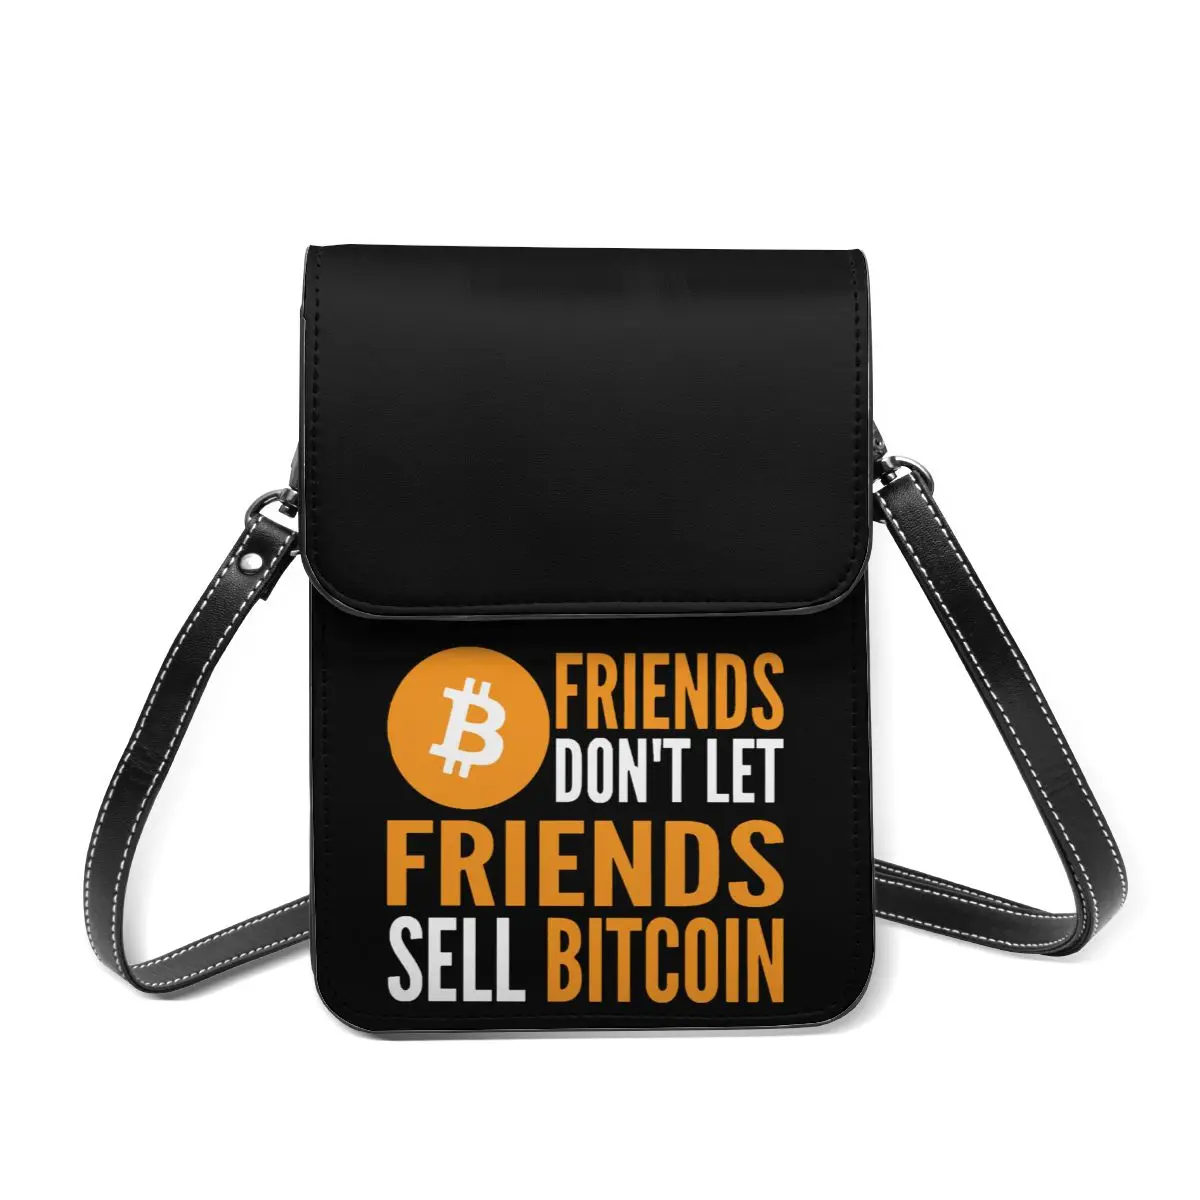 

Best Friends Bitcoin Shoulder Bag BTC Letters Jokes Outdoor Woman Mobile Phone Bag Gift Stylish Leather Bags